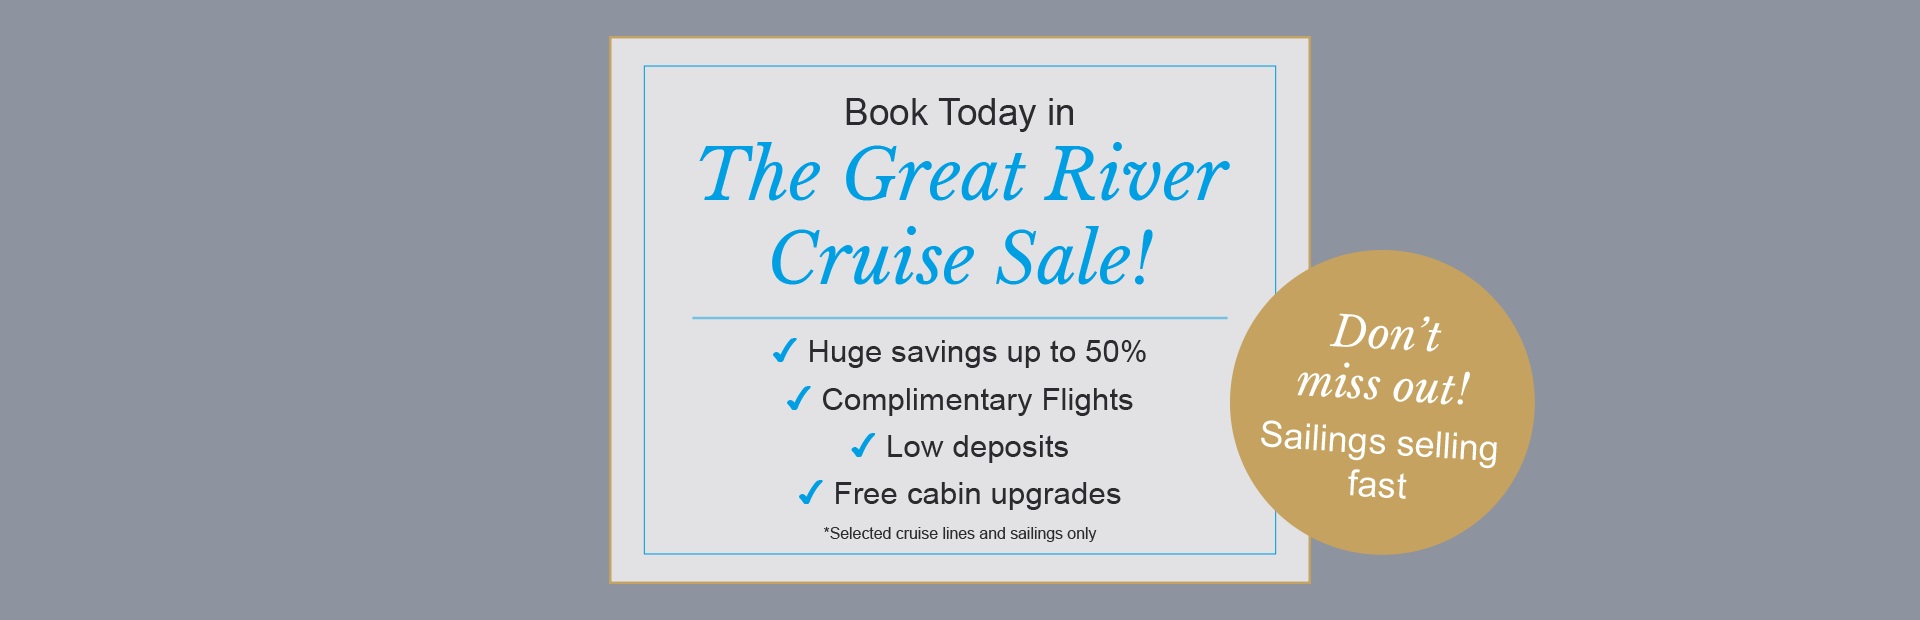 Book Now, Sail Later